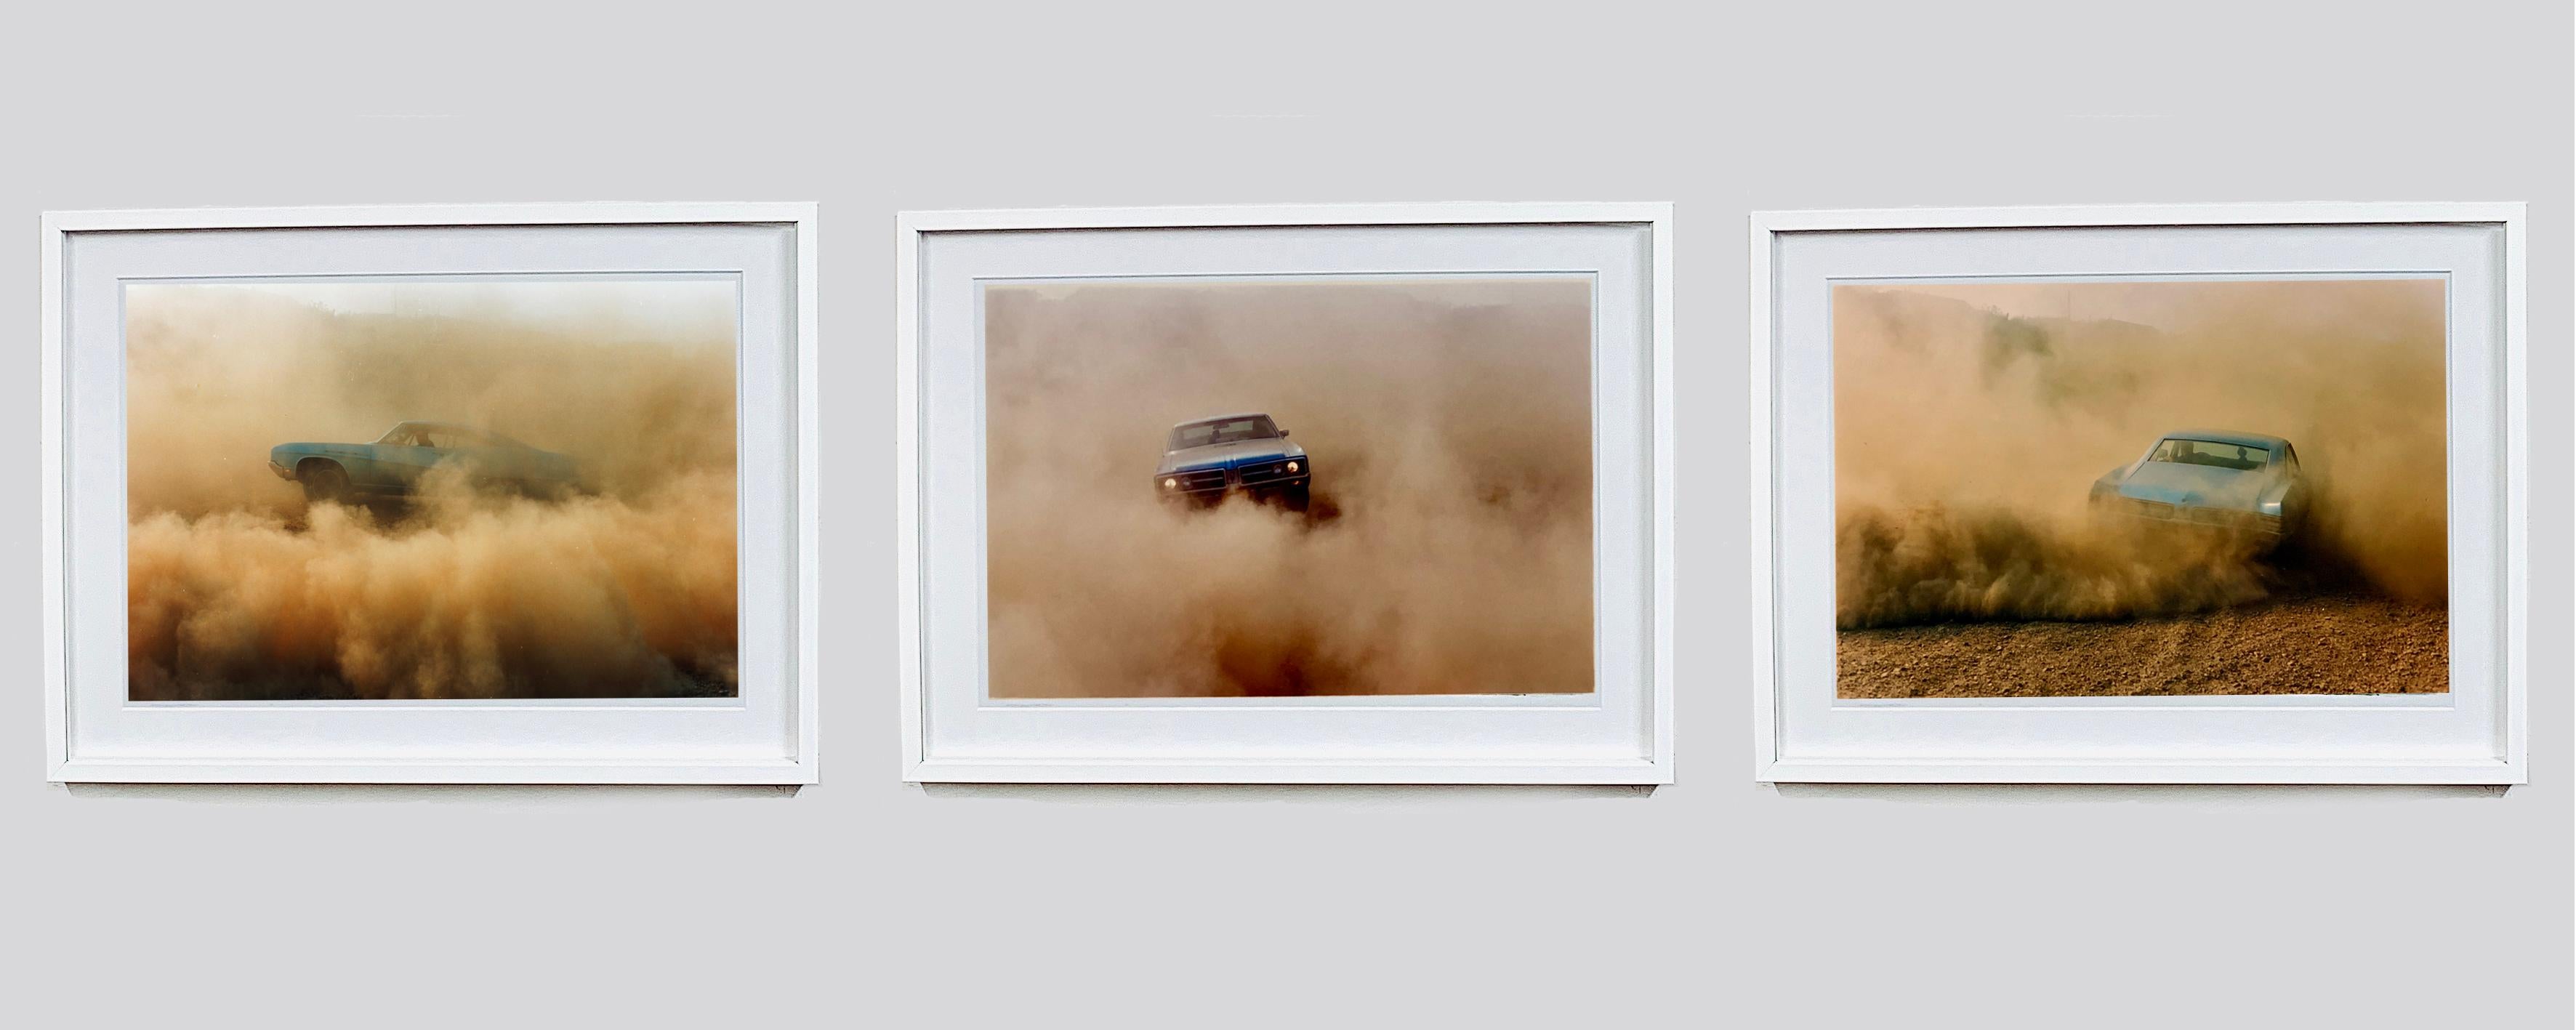 Buick in the Dust, Hemsby, Norfolk - Color Photography Triptych - Print by Richard Heeps